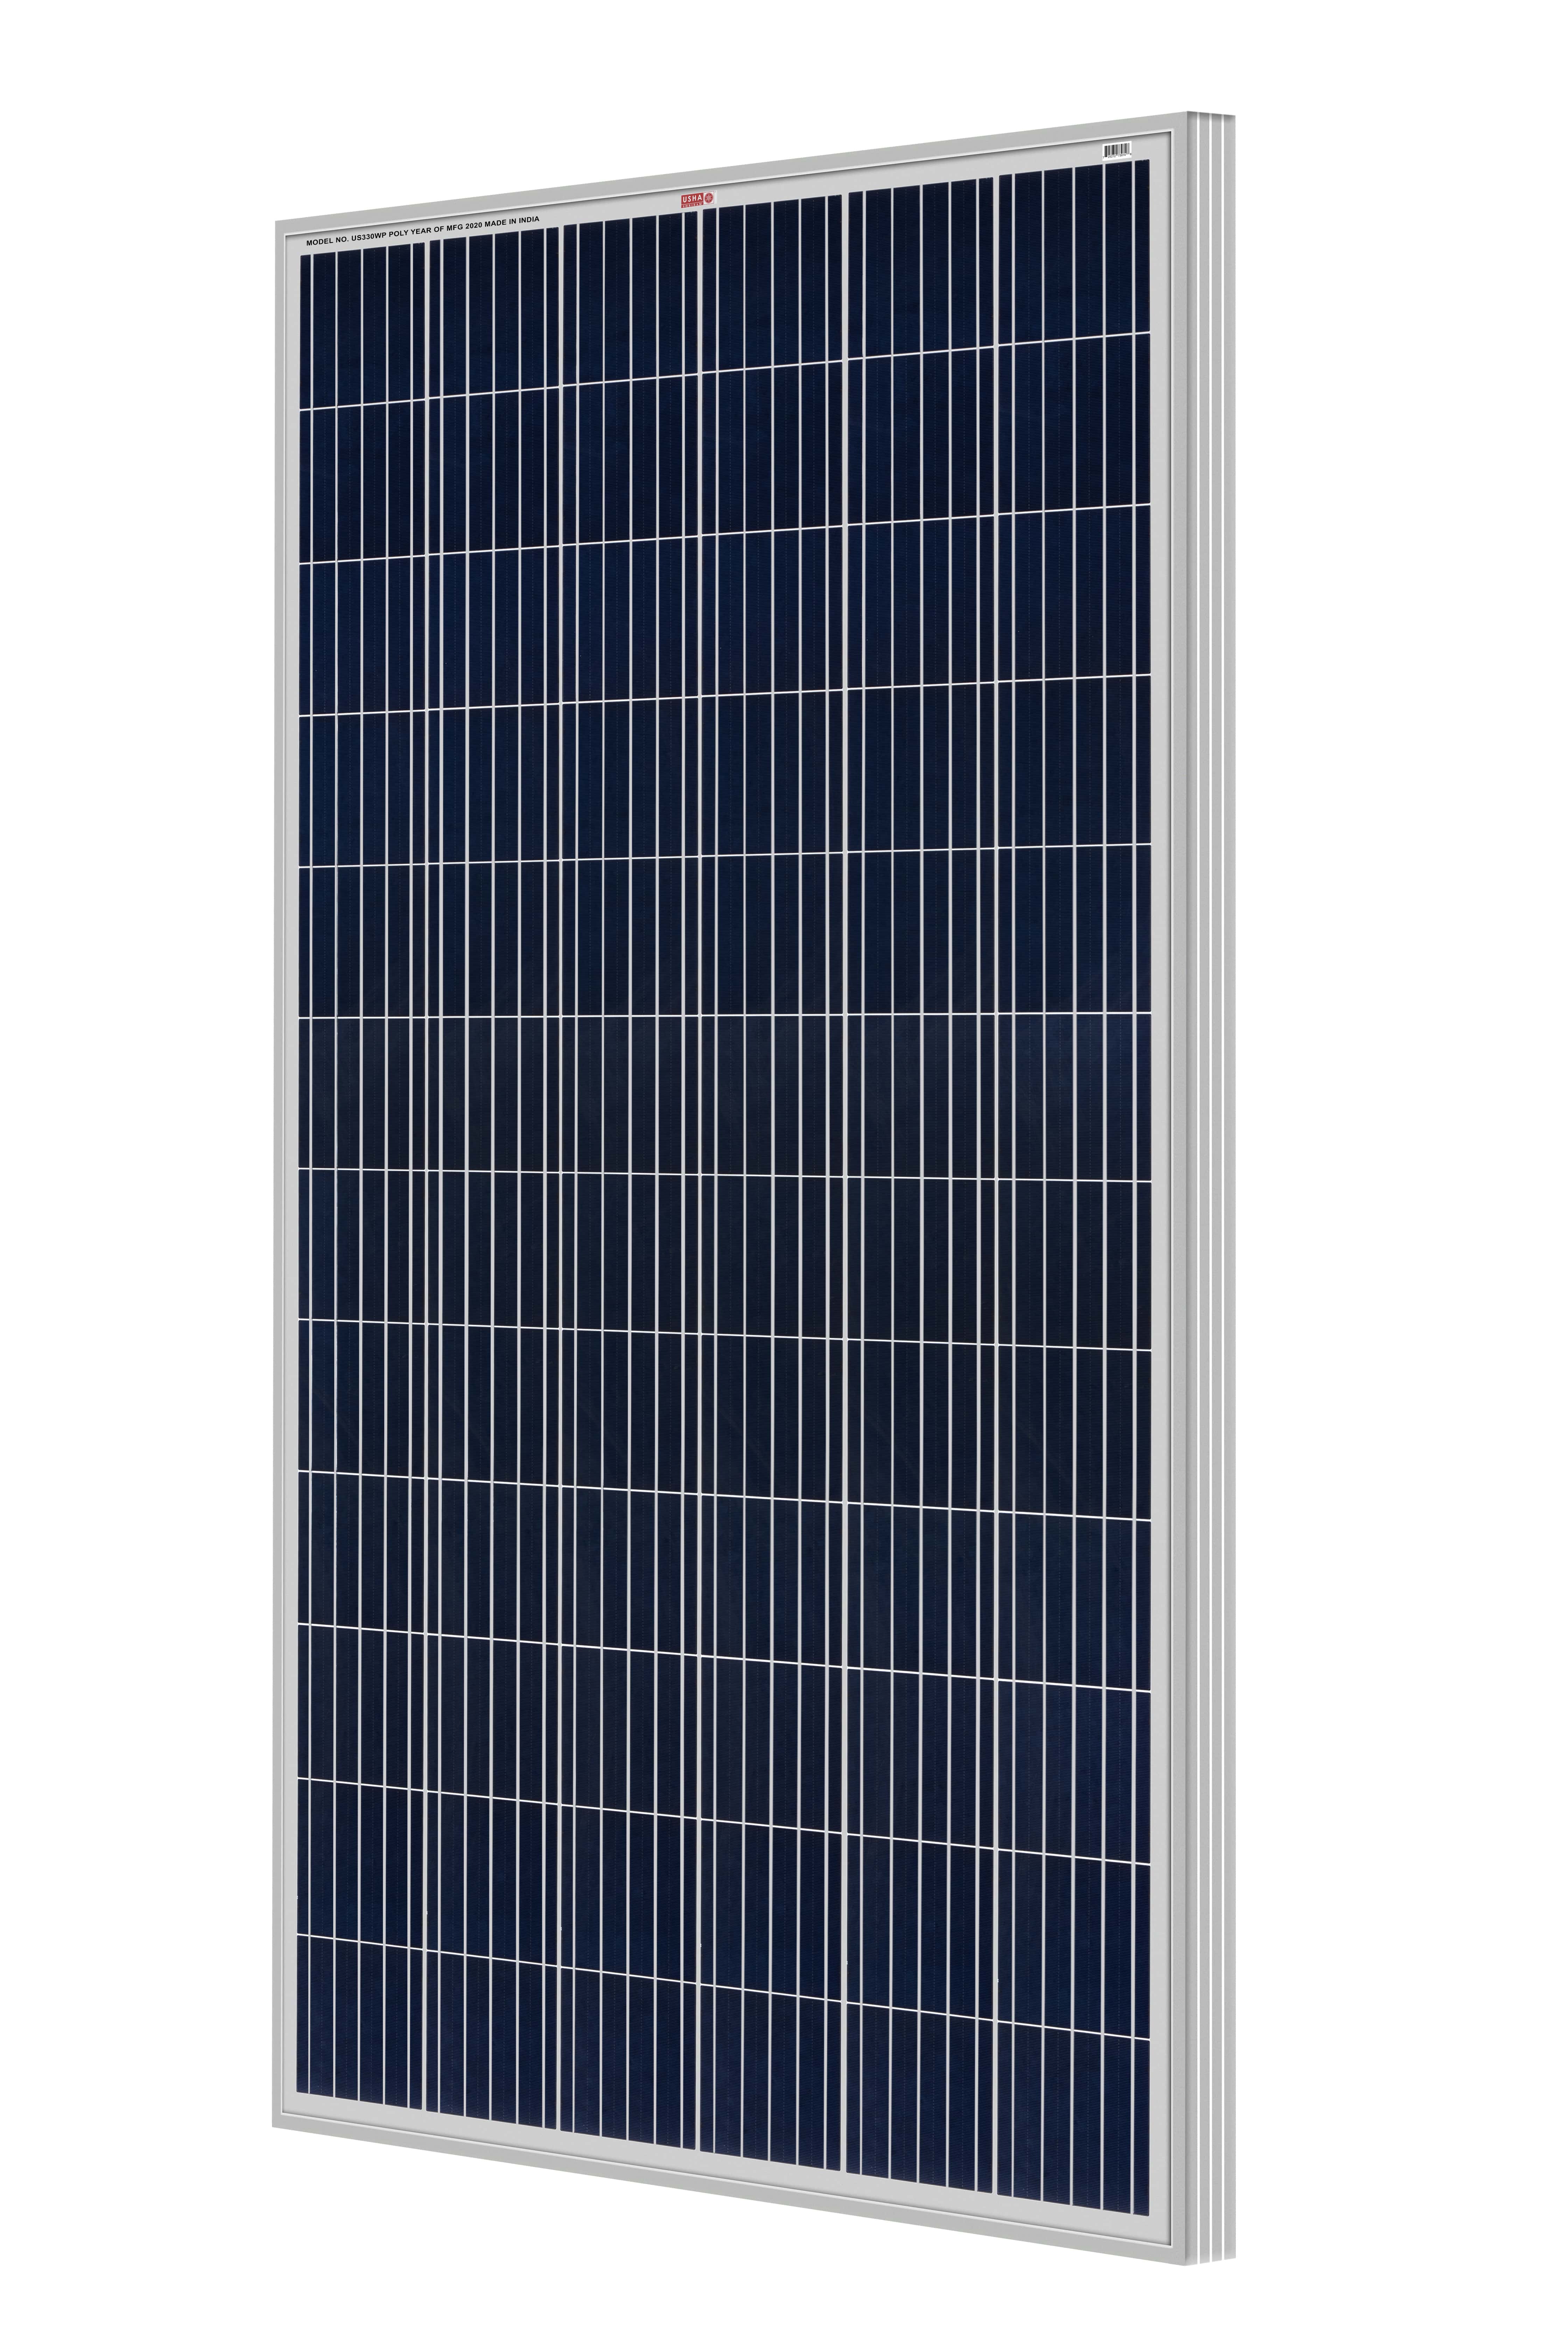 Solar PV Panel Manufacturing Company in India